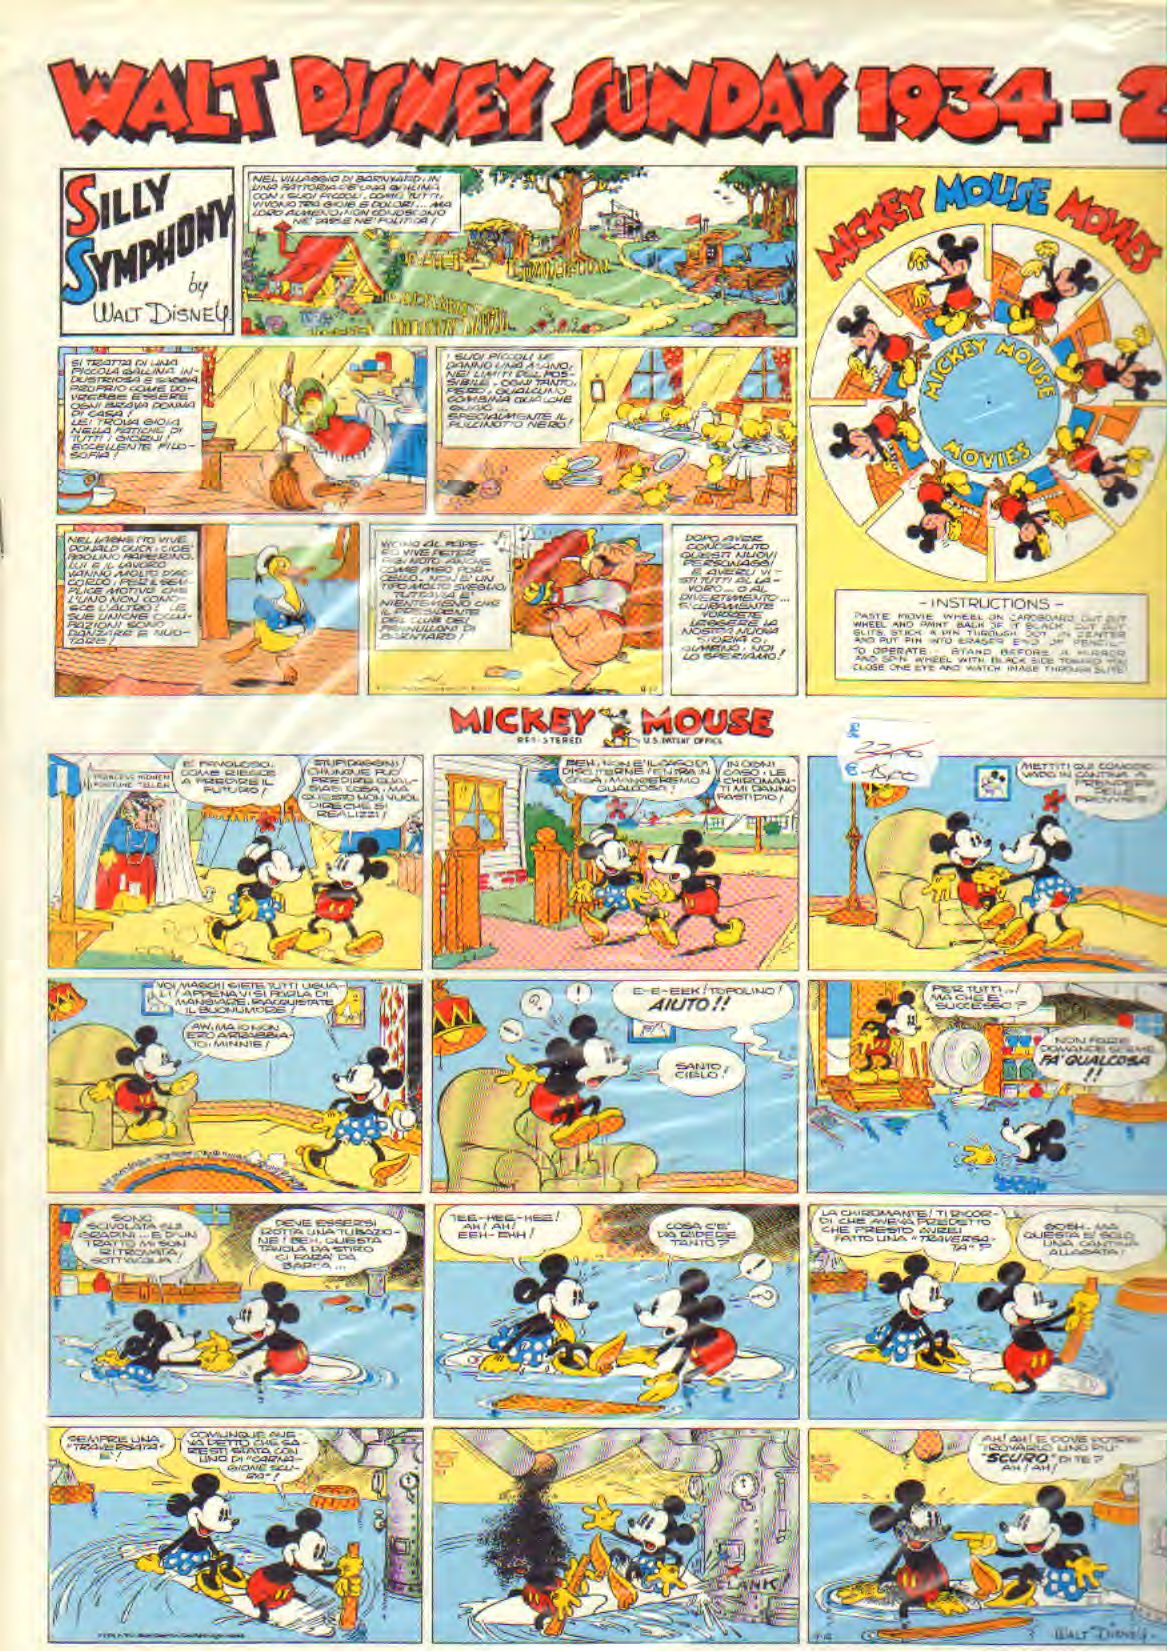 Silly Symphonies E Mickey Mouse (1934/2) 32 P